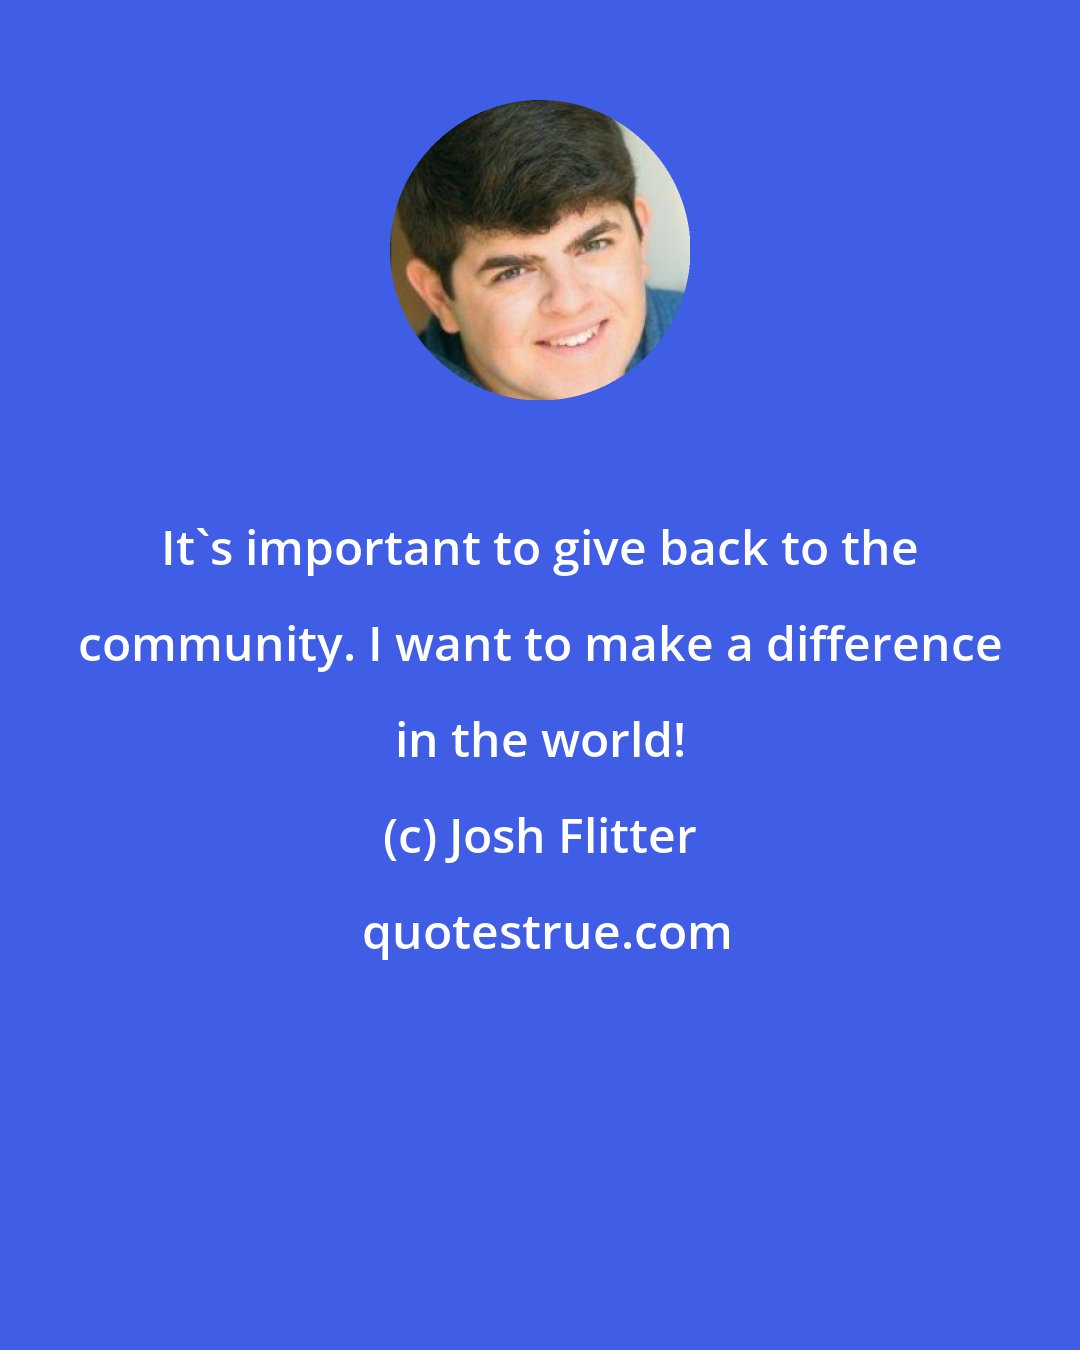 Josh Flitter: It's important to give back to the community. I want to make a difference in the world!